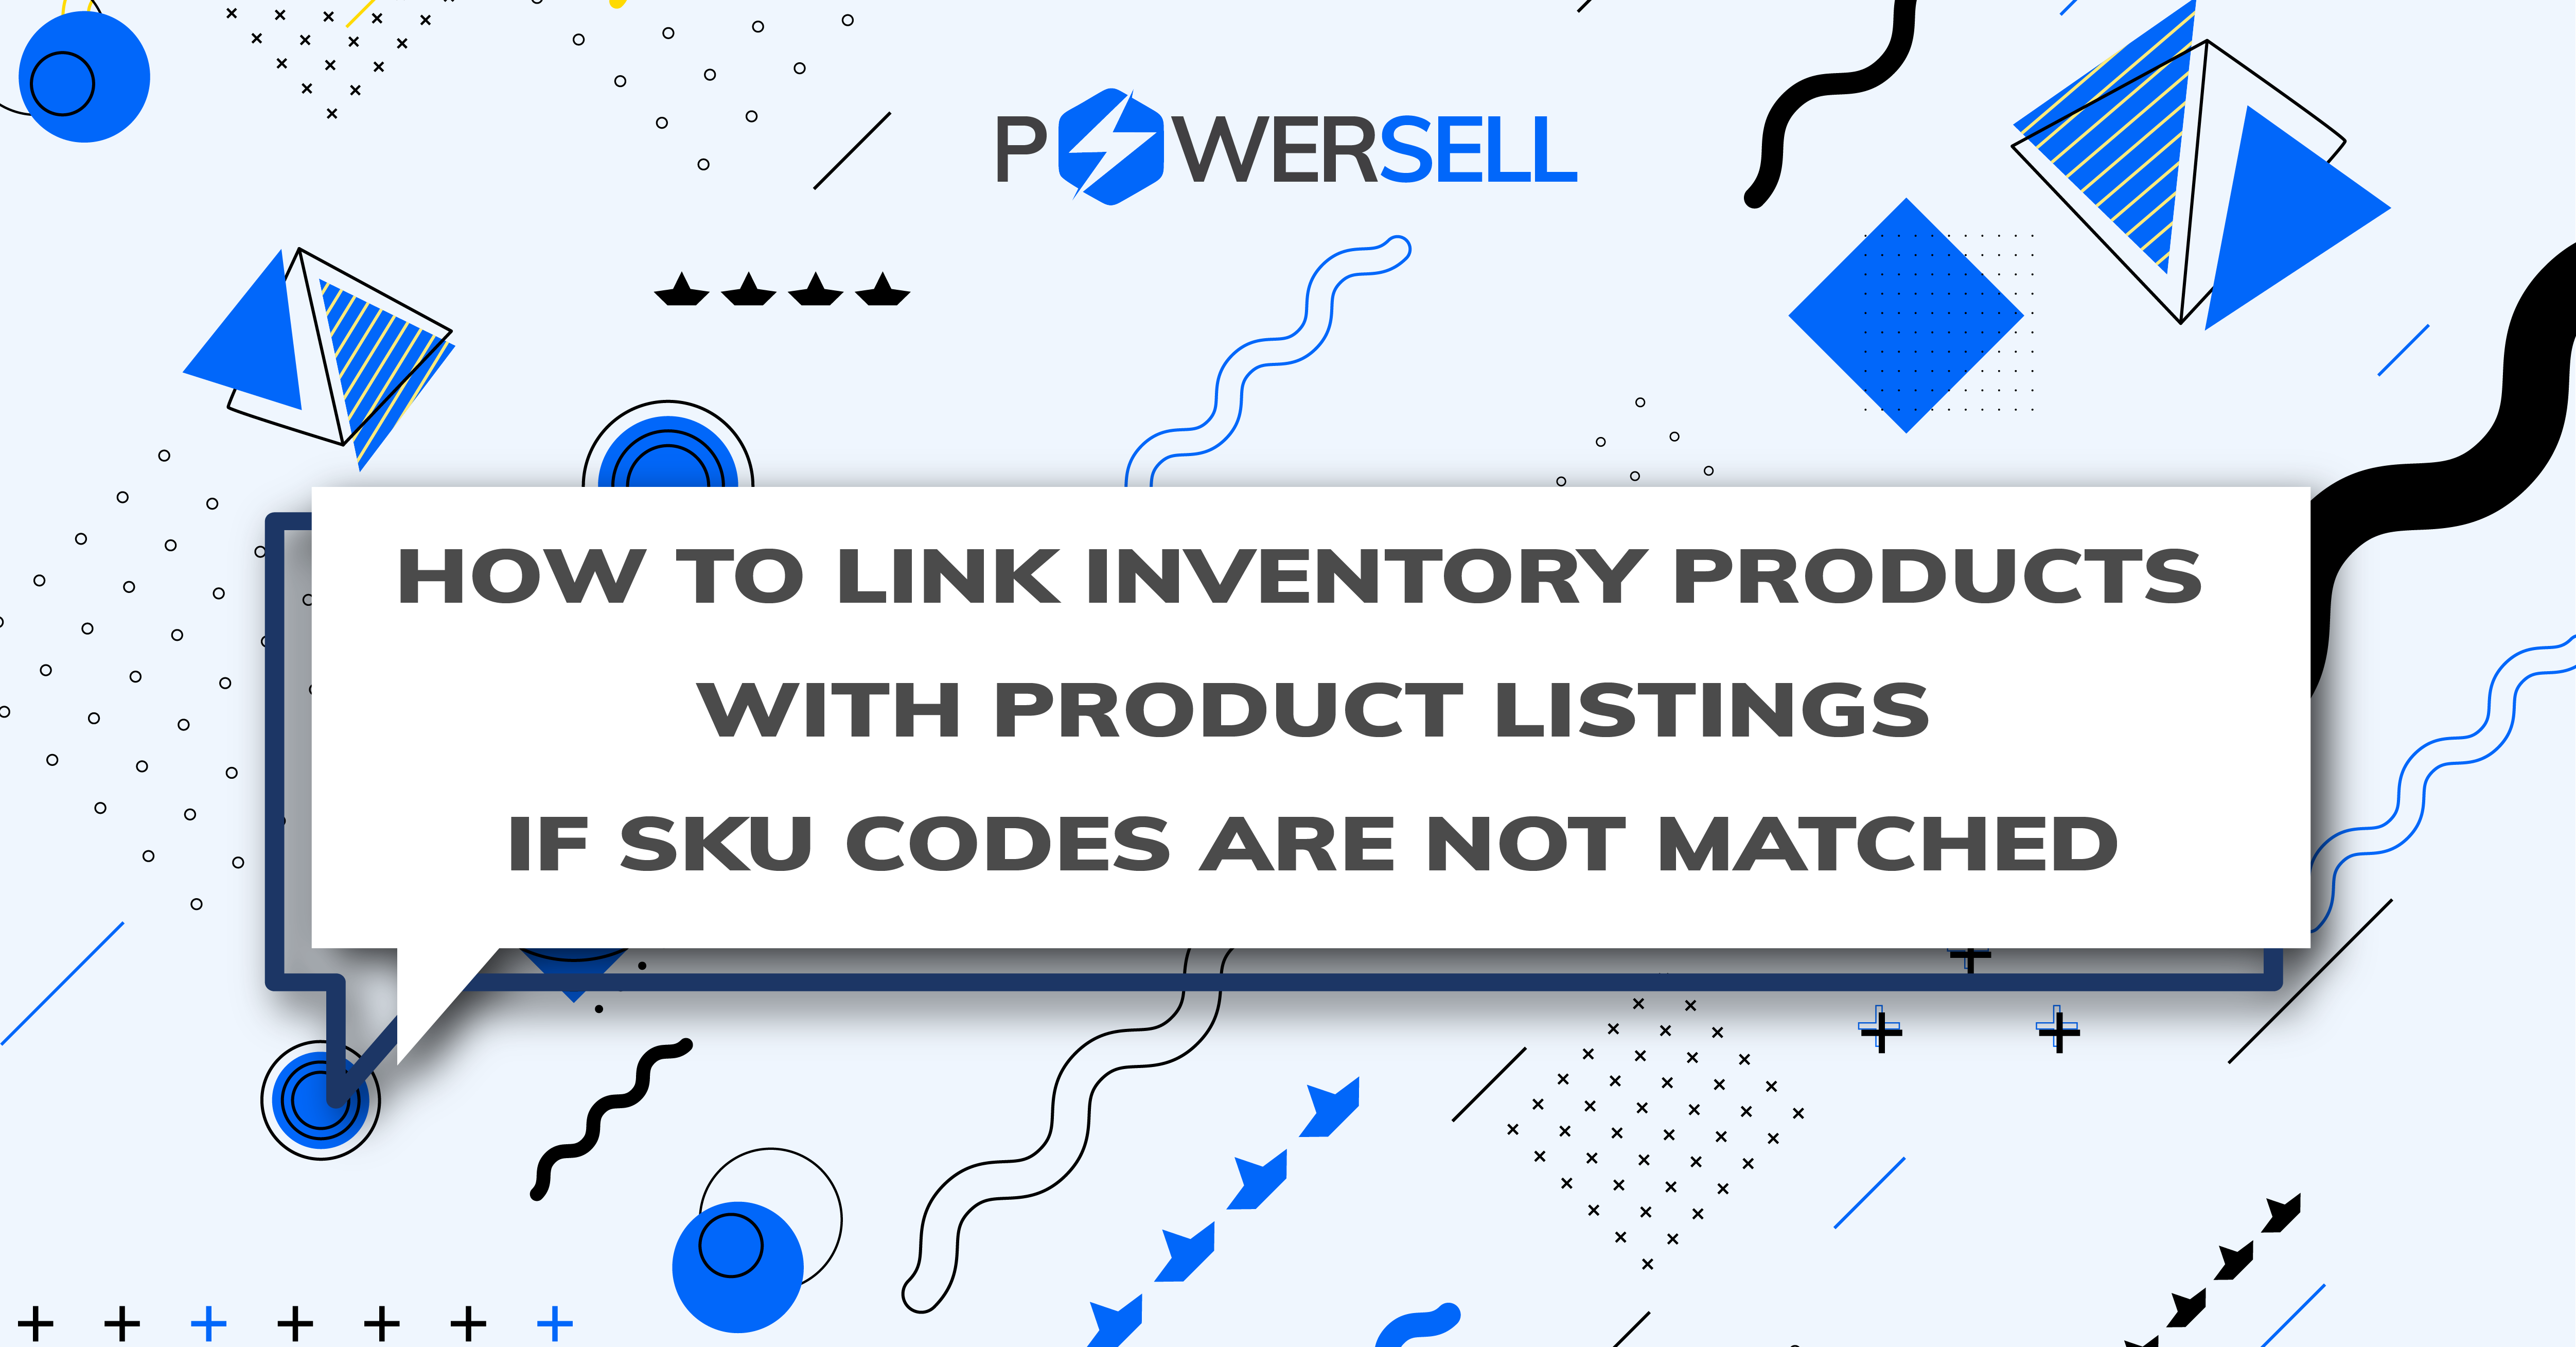 HOW TO LINK INVENTORY PRODUCTS WITH PRODUCT LISTINGS IF SKU CODES ARE NOT MATCHED